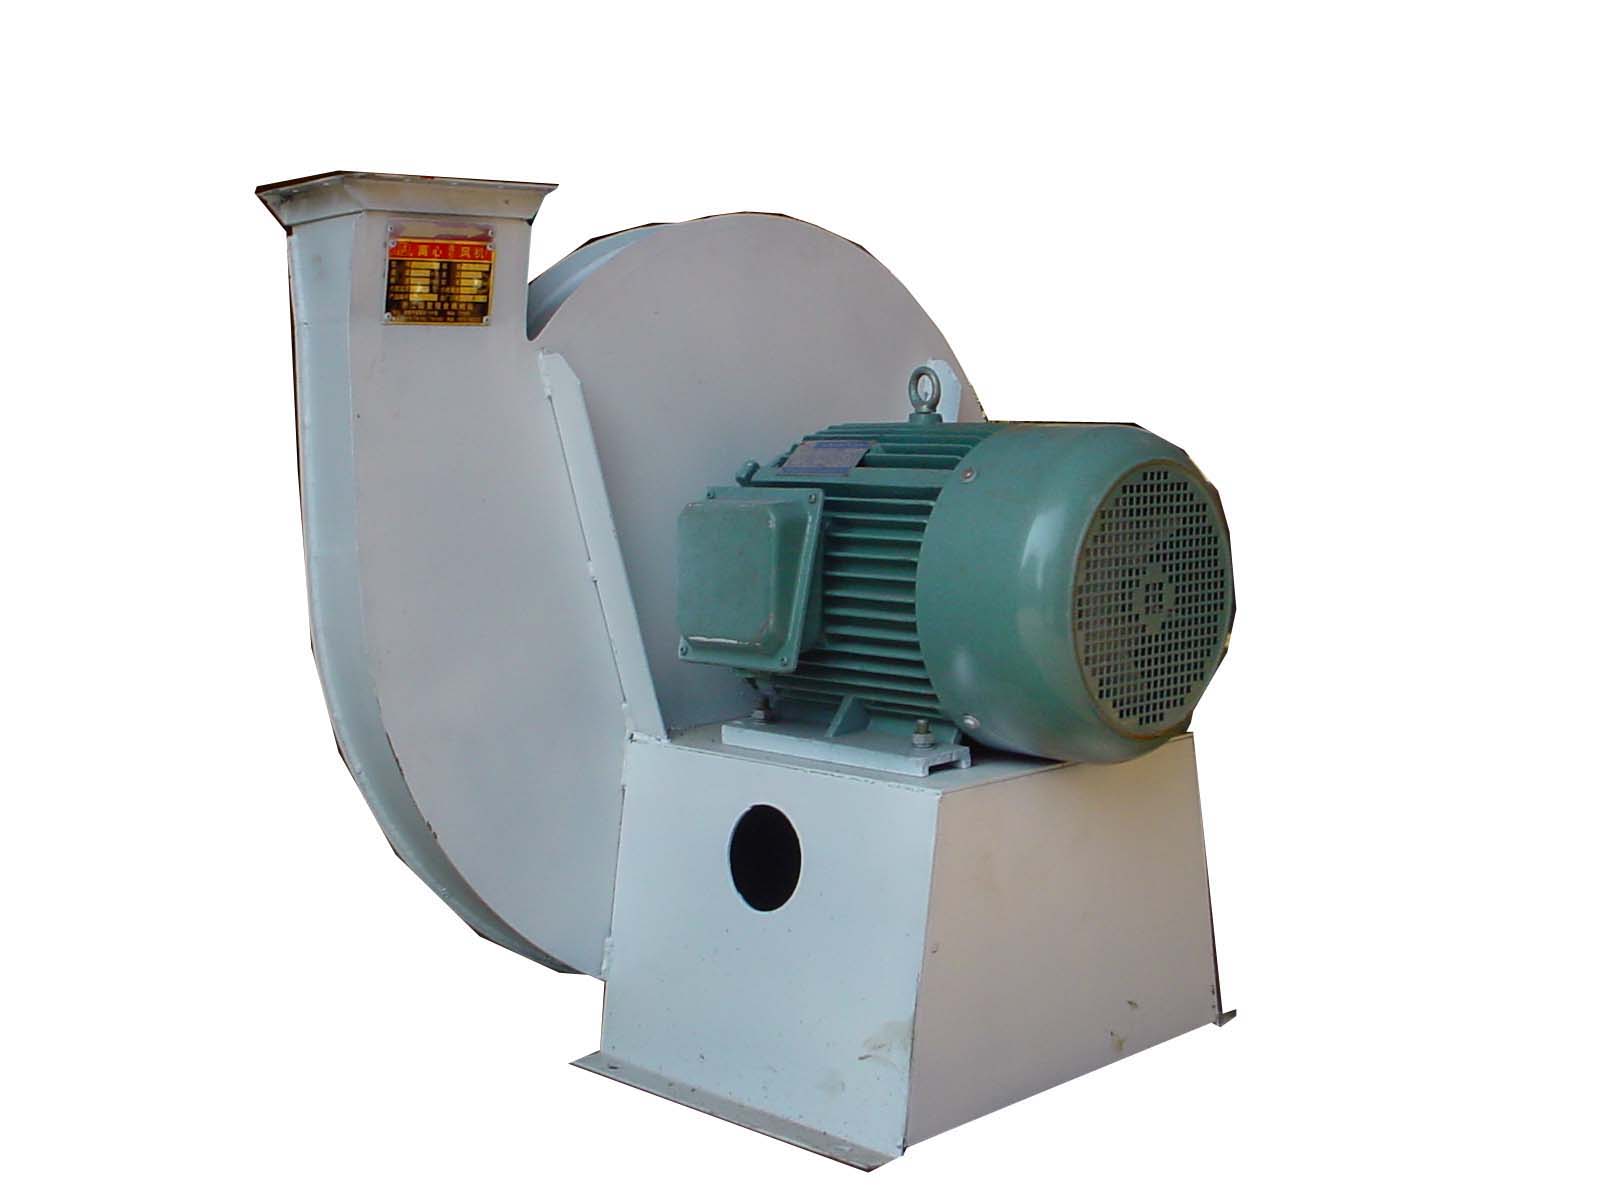 CANADA BLOWER CENTRIFUGAL FAN & BLOWERS - http://www.canadafans.com/vaneaxial-power-roof-ventilator.php